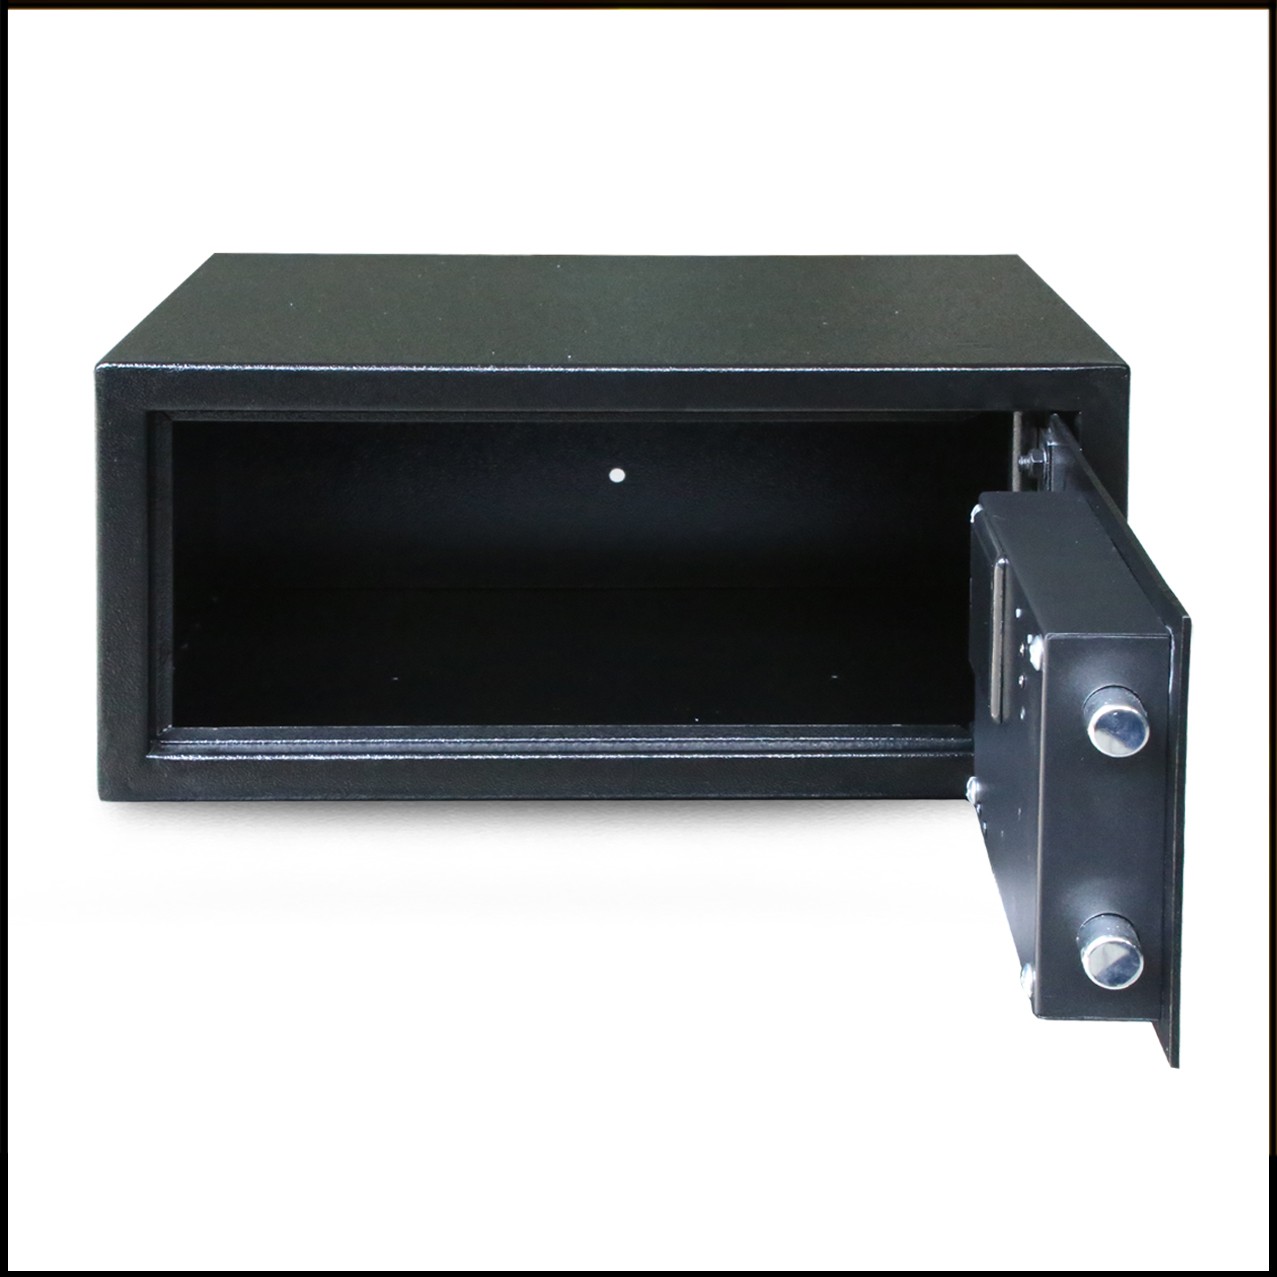 Hotels / In Room and Dorm Room Safes